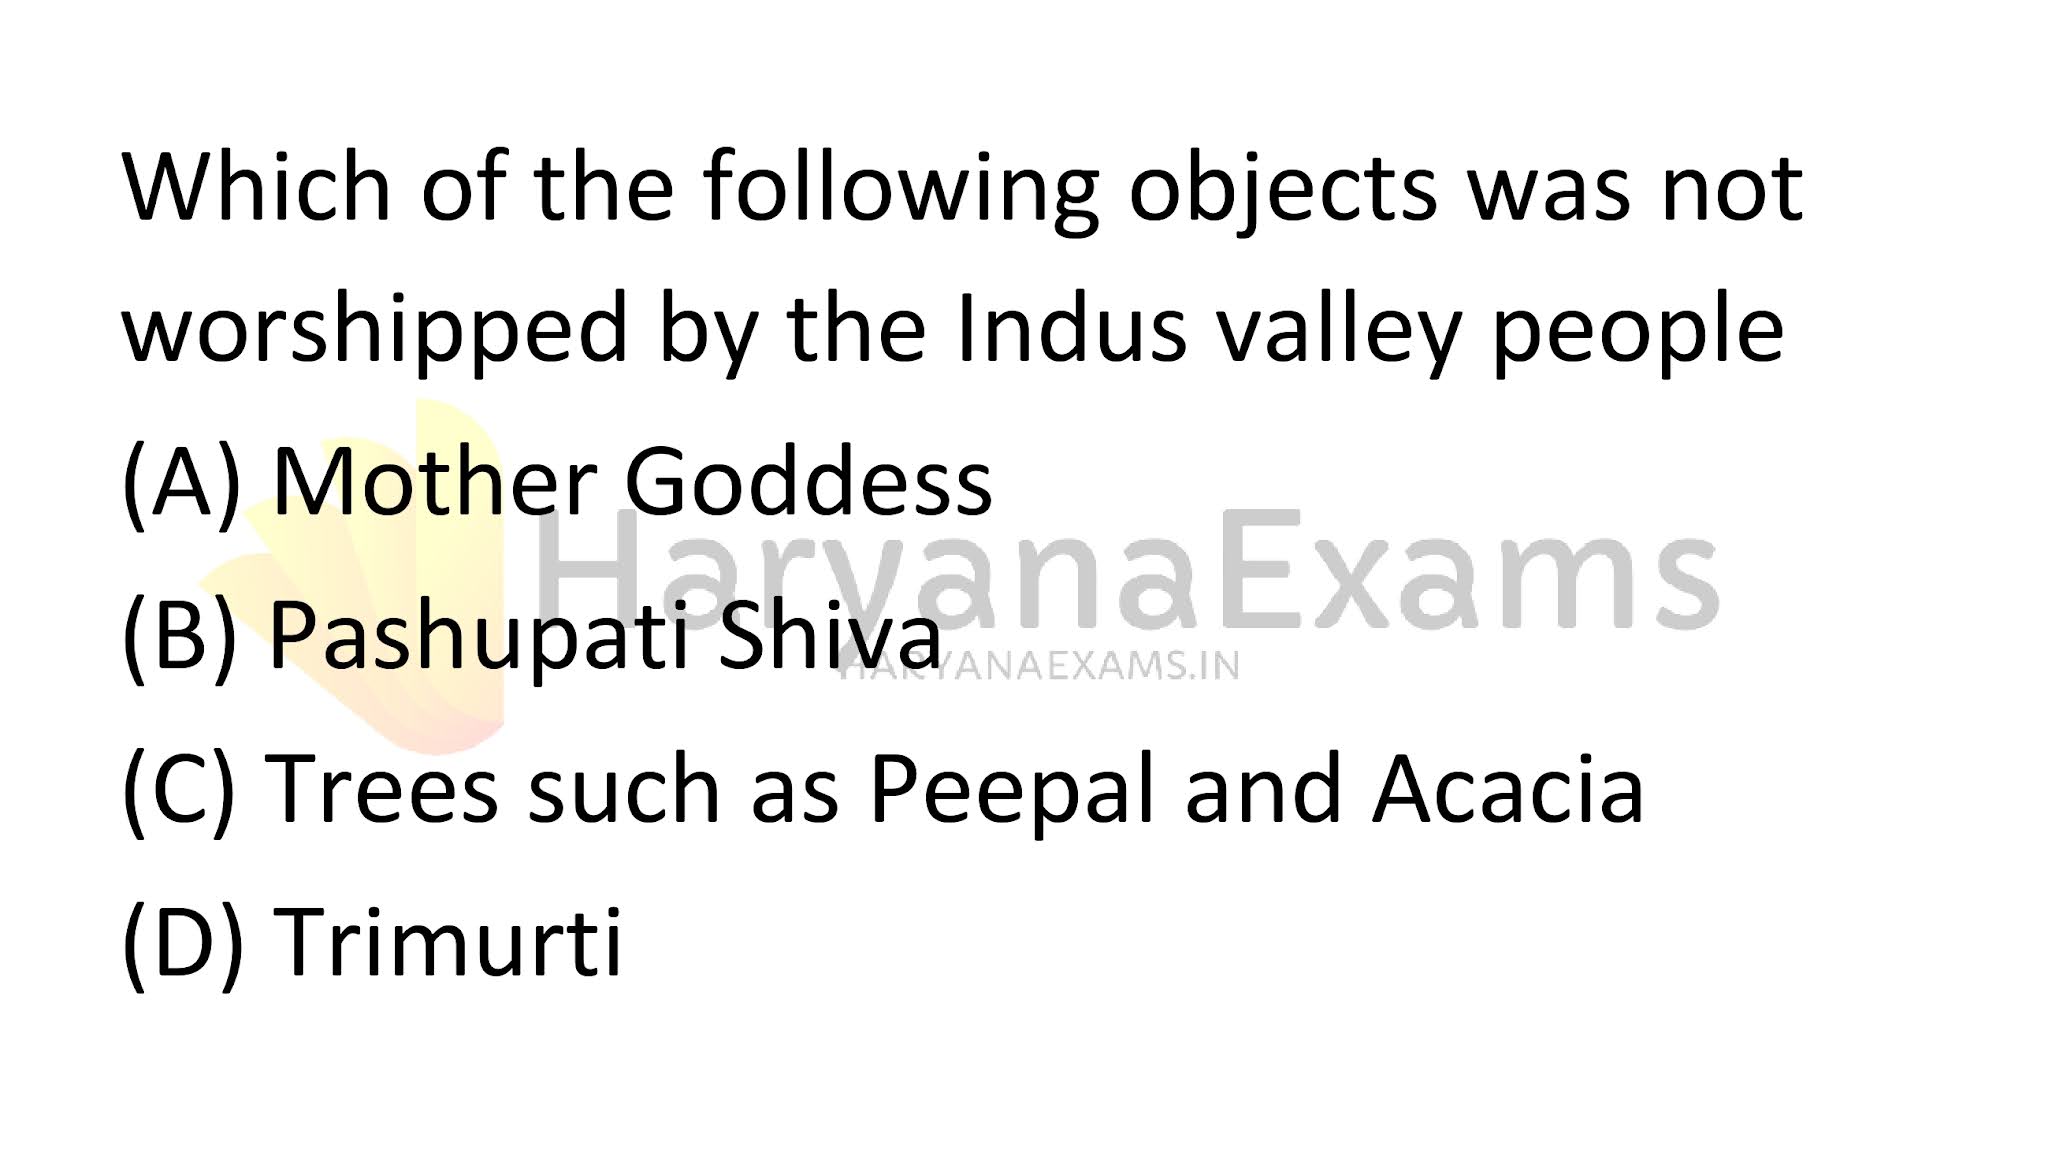 Which of the following objects was not worshipped by the Indus valley people